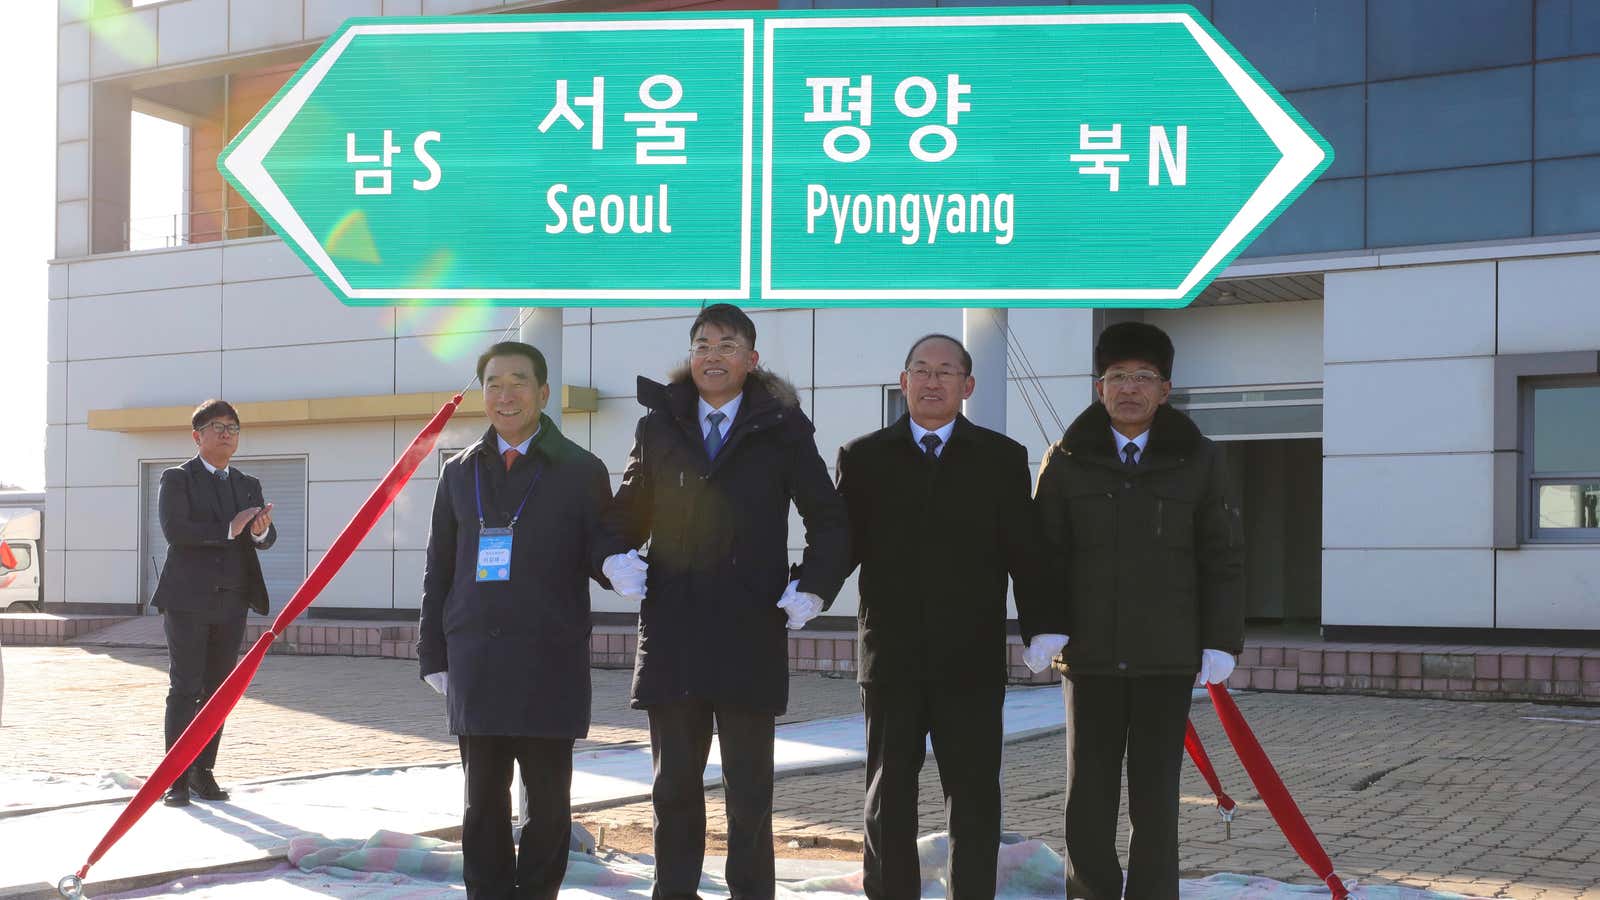 South and North Korean officials unveil the Seoul to Pyeongyang railway sign.